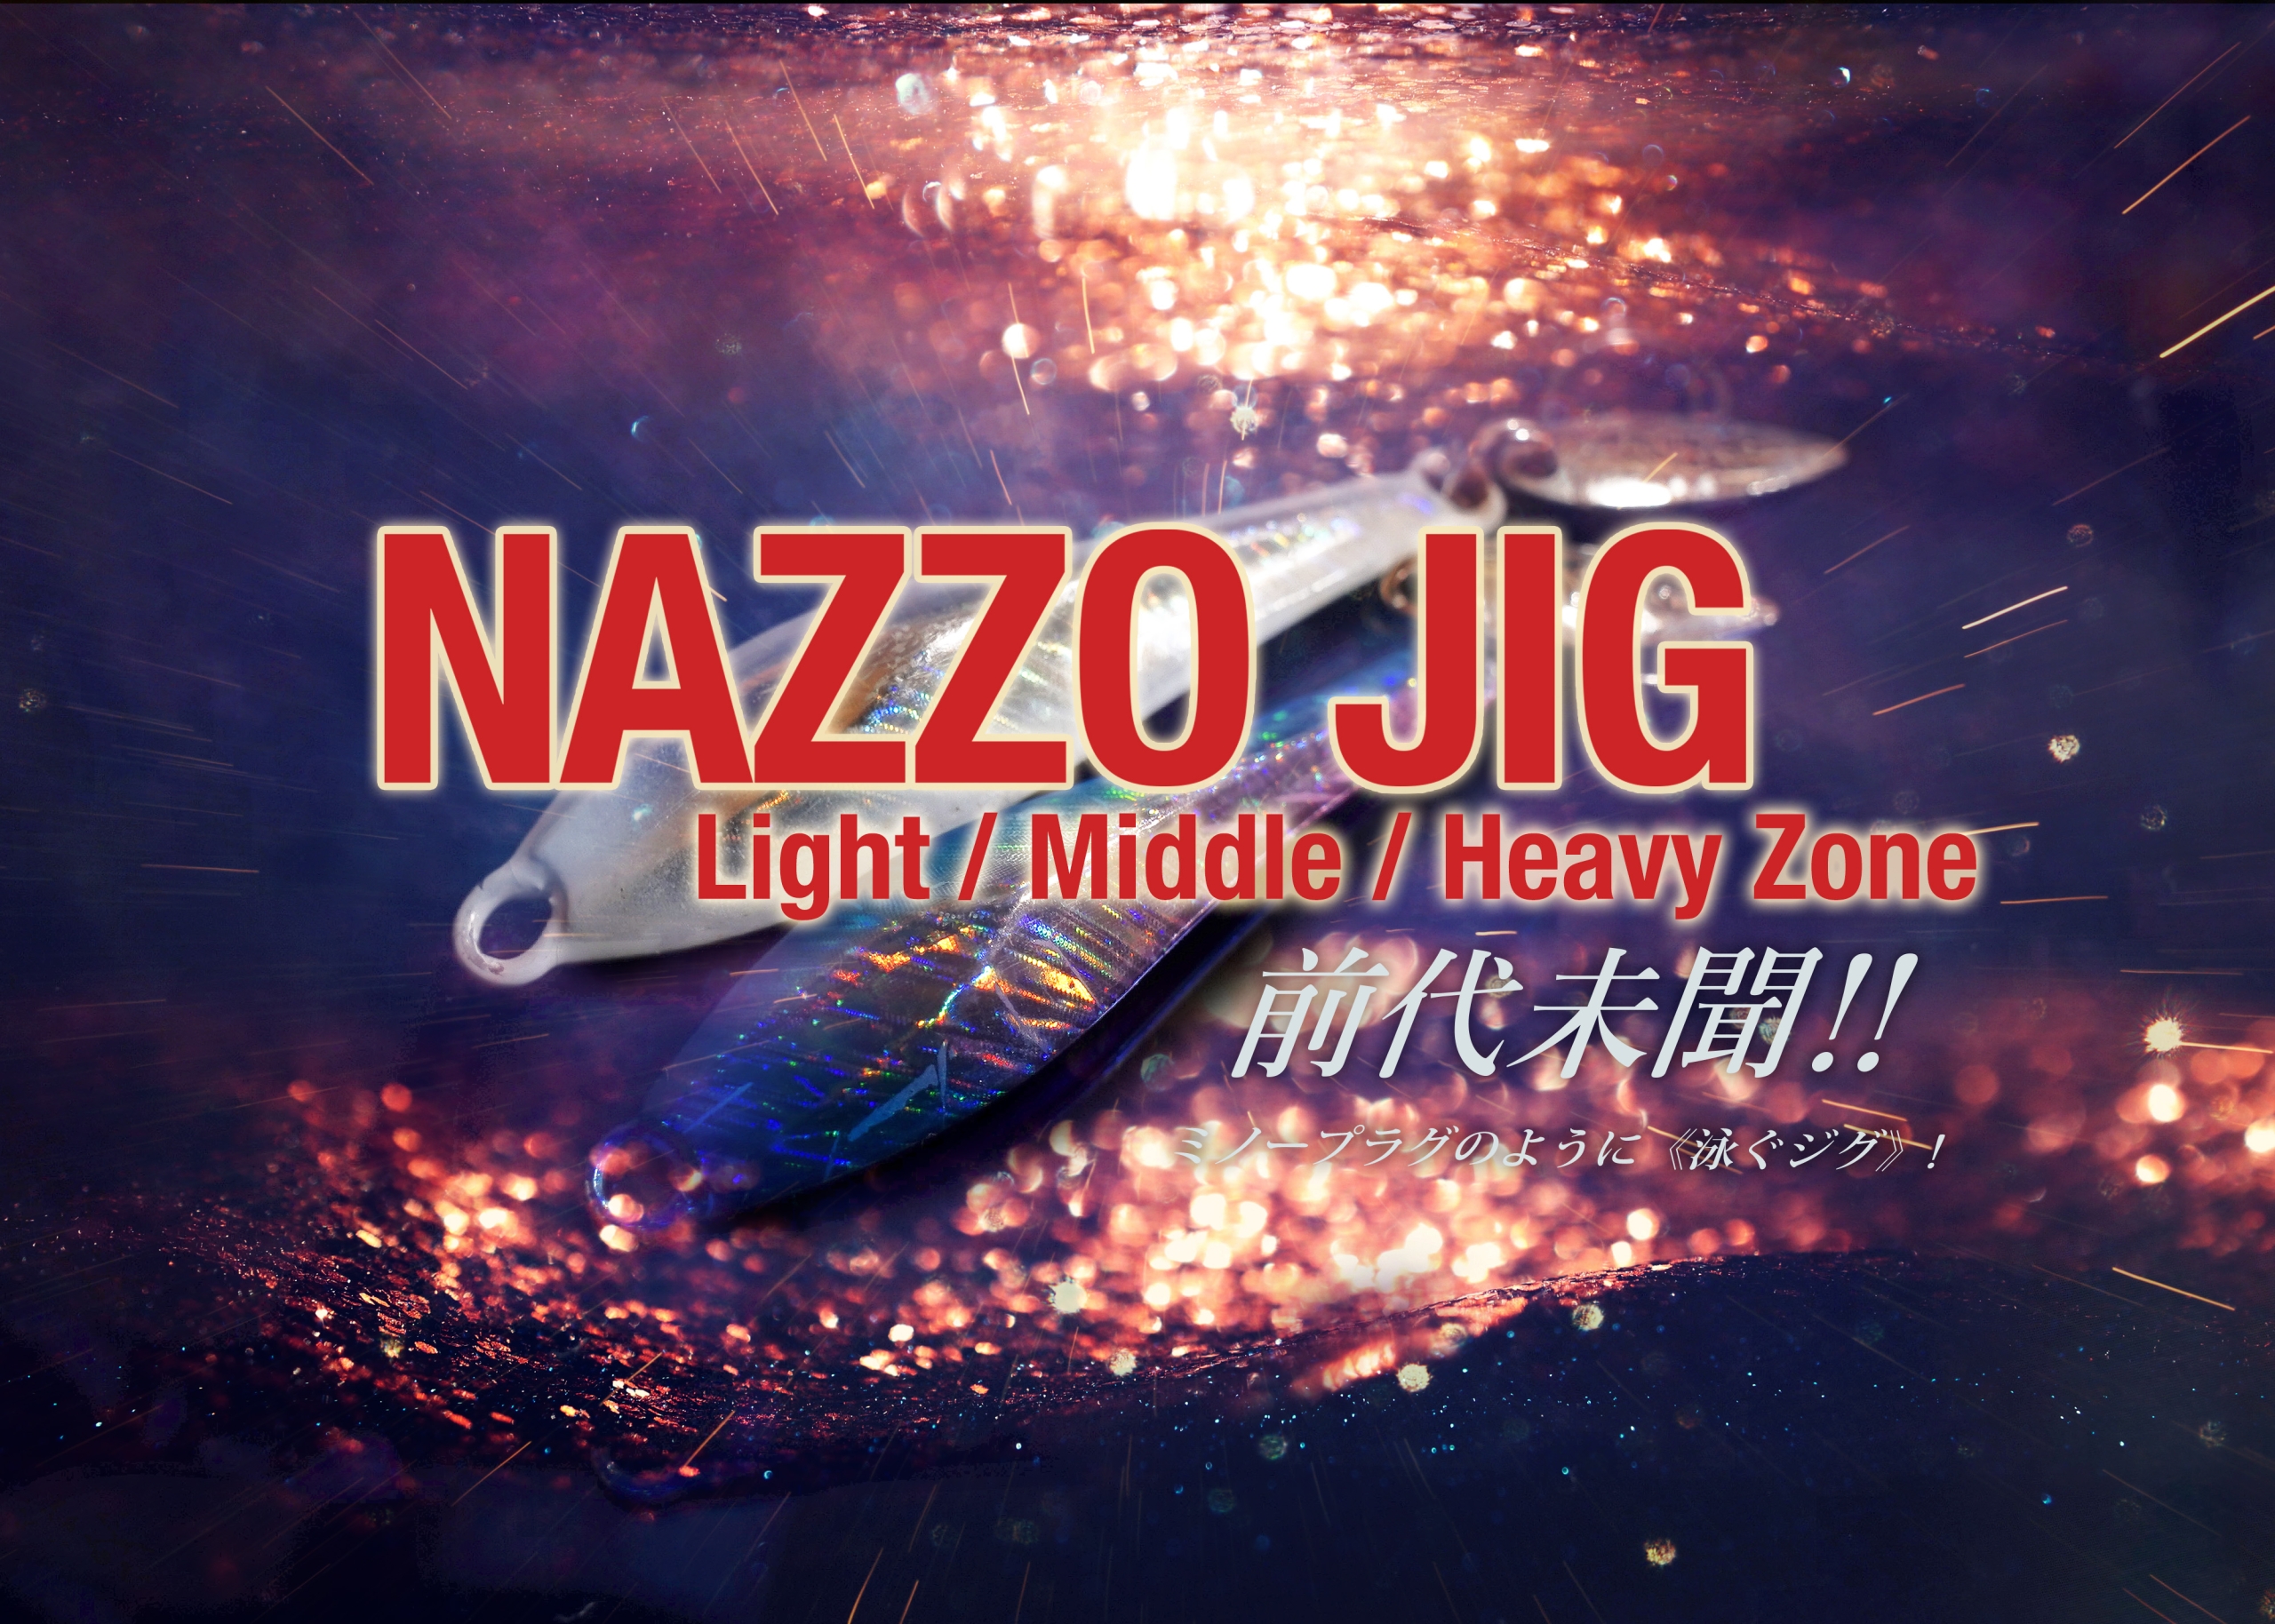 NAZZO JIG Light / Middle / Heavy - INX.label